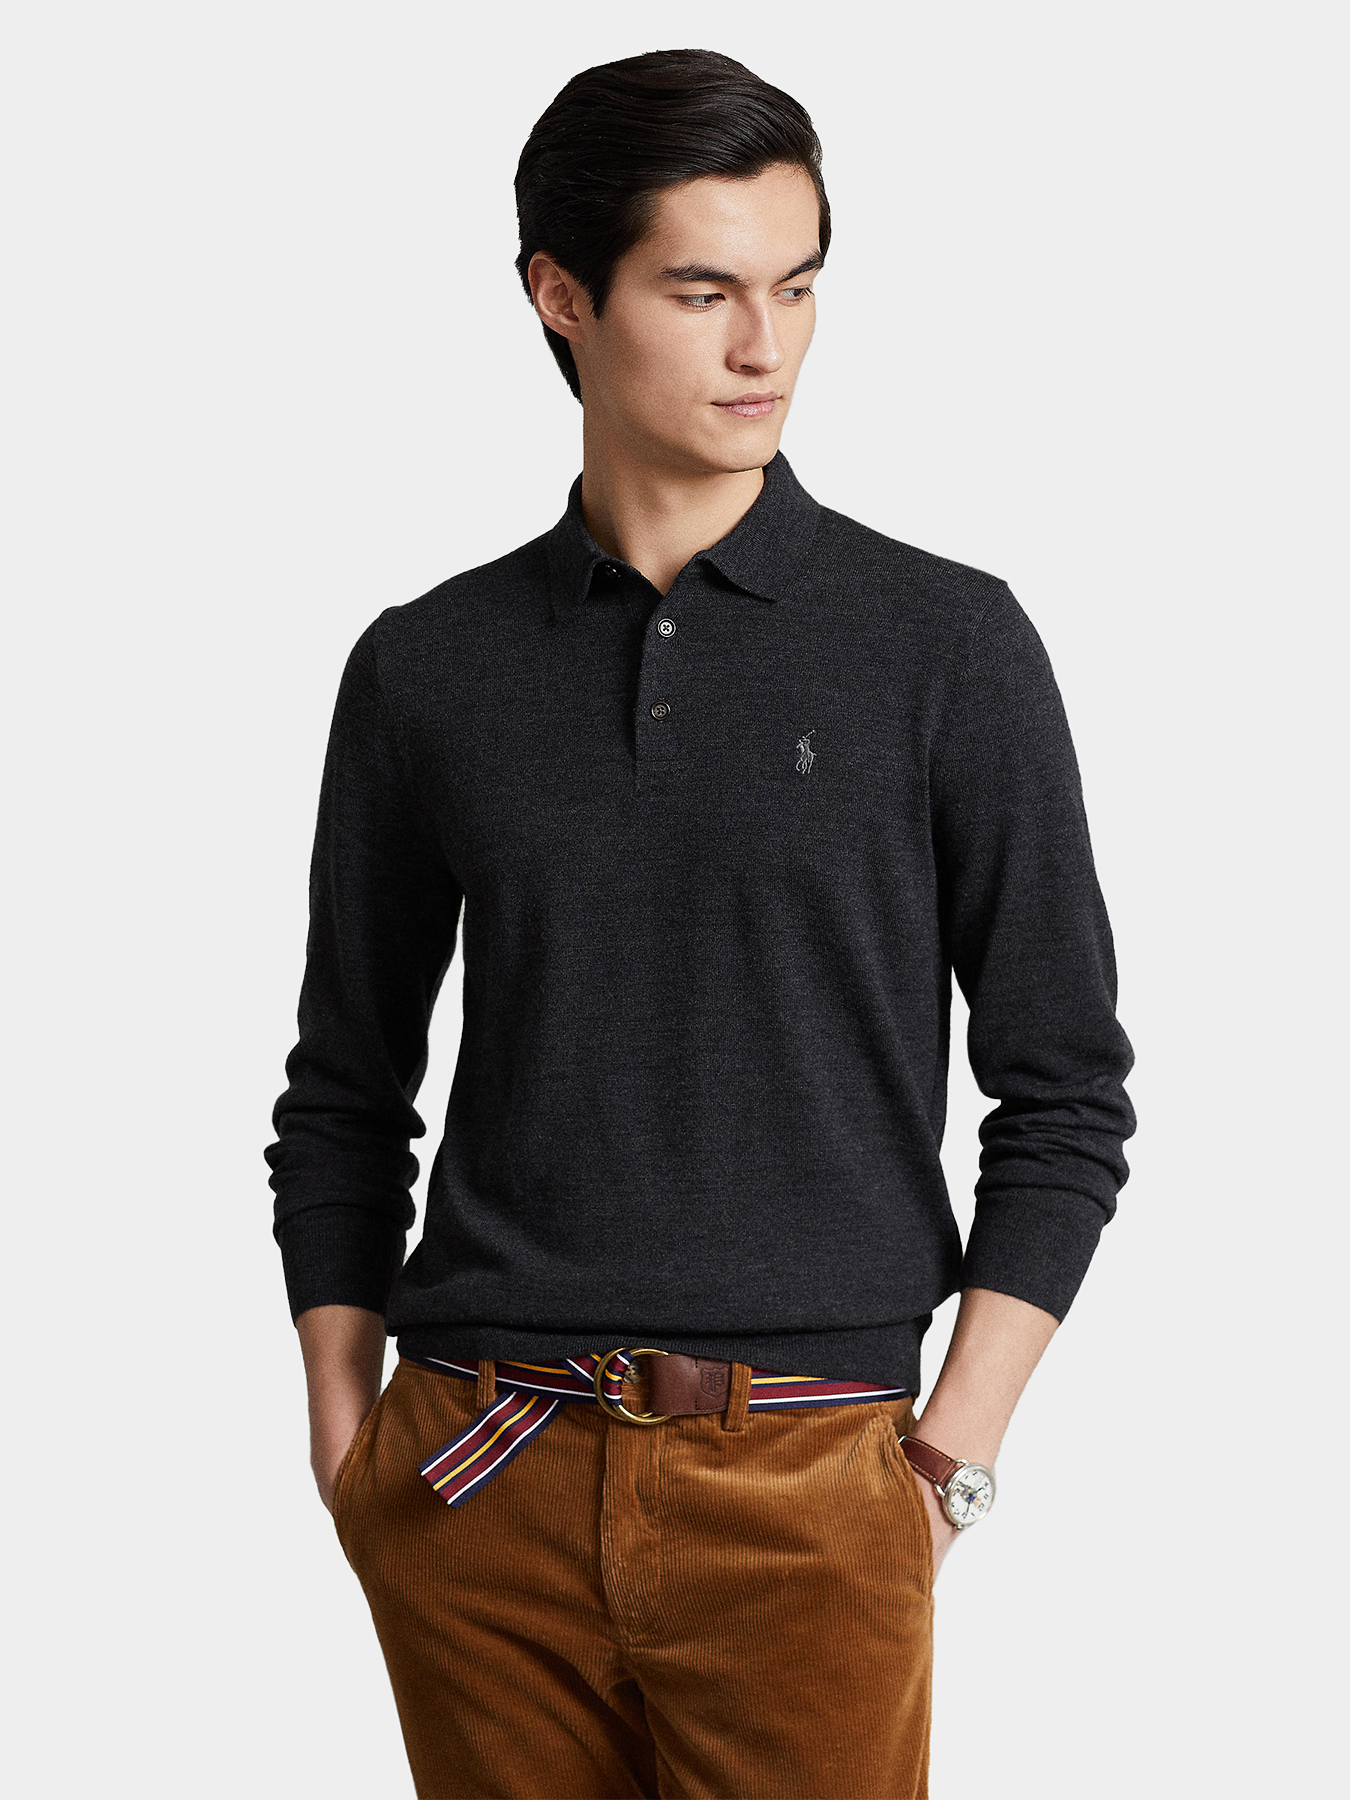 Wool sweater with collar and buttons brand POLO RALPH LAUREN —  /en